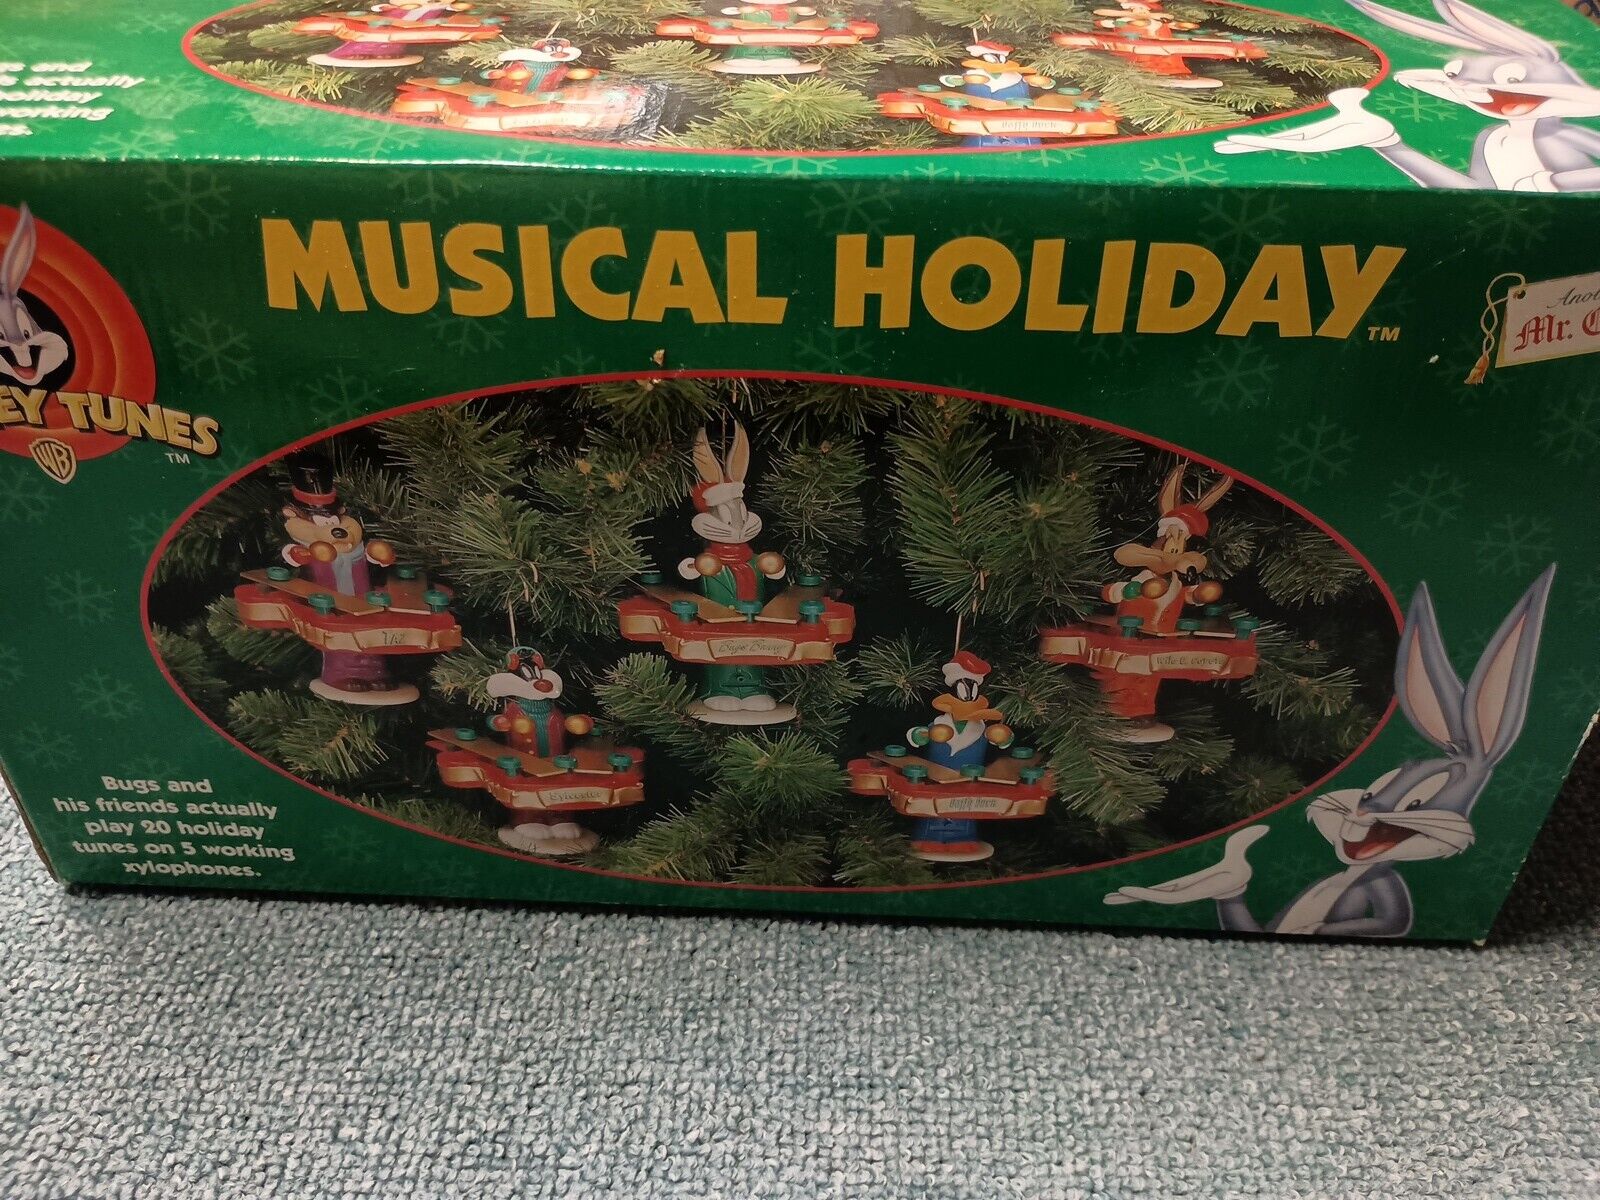 Mr. Christmas Looney Tunes Ornaments Musical Holiday 1997 Plays 20 Song With Box